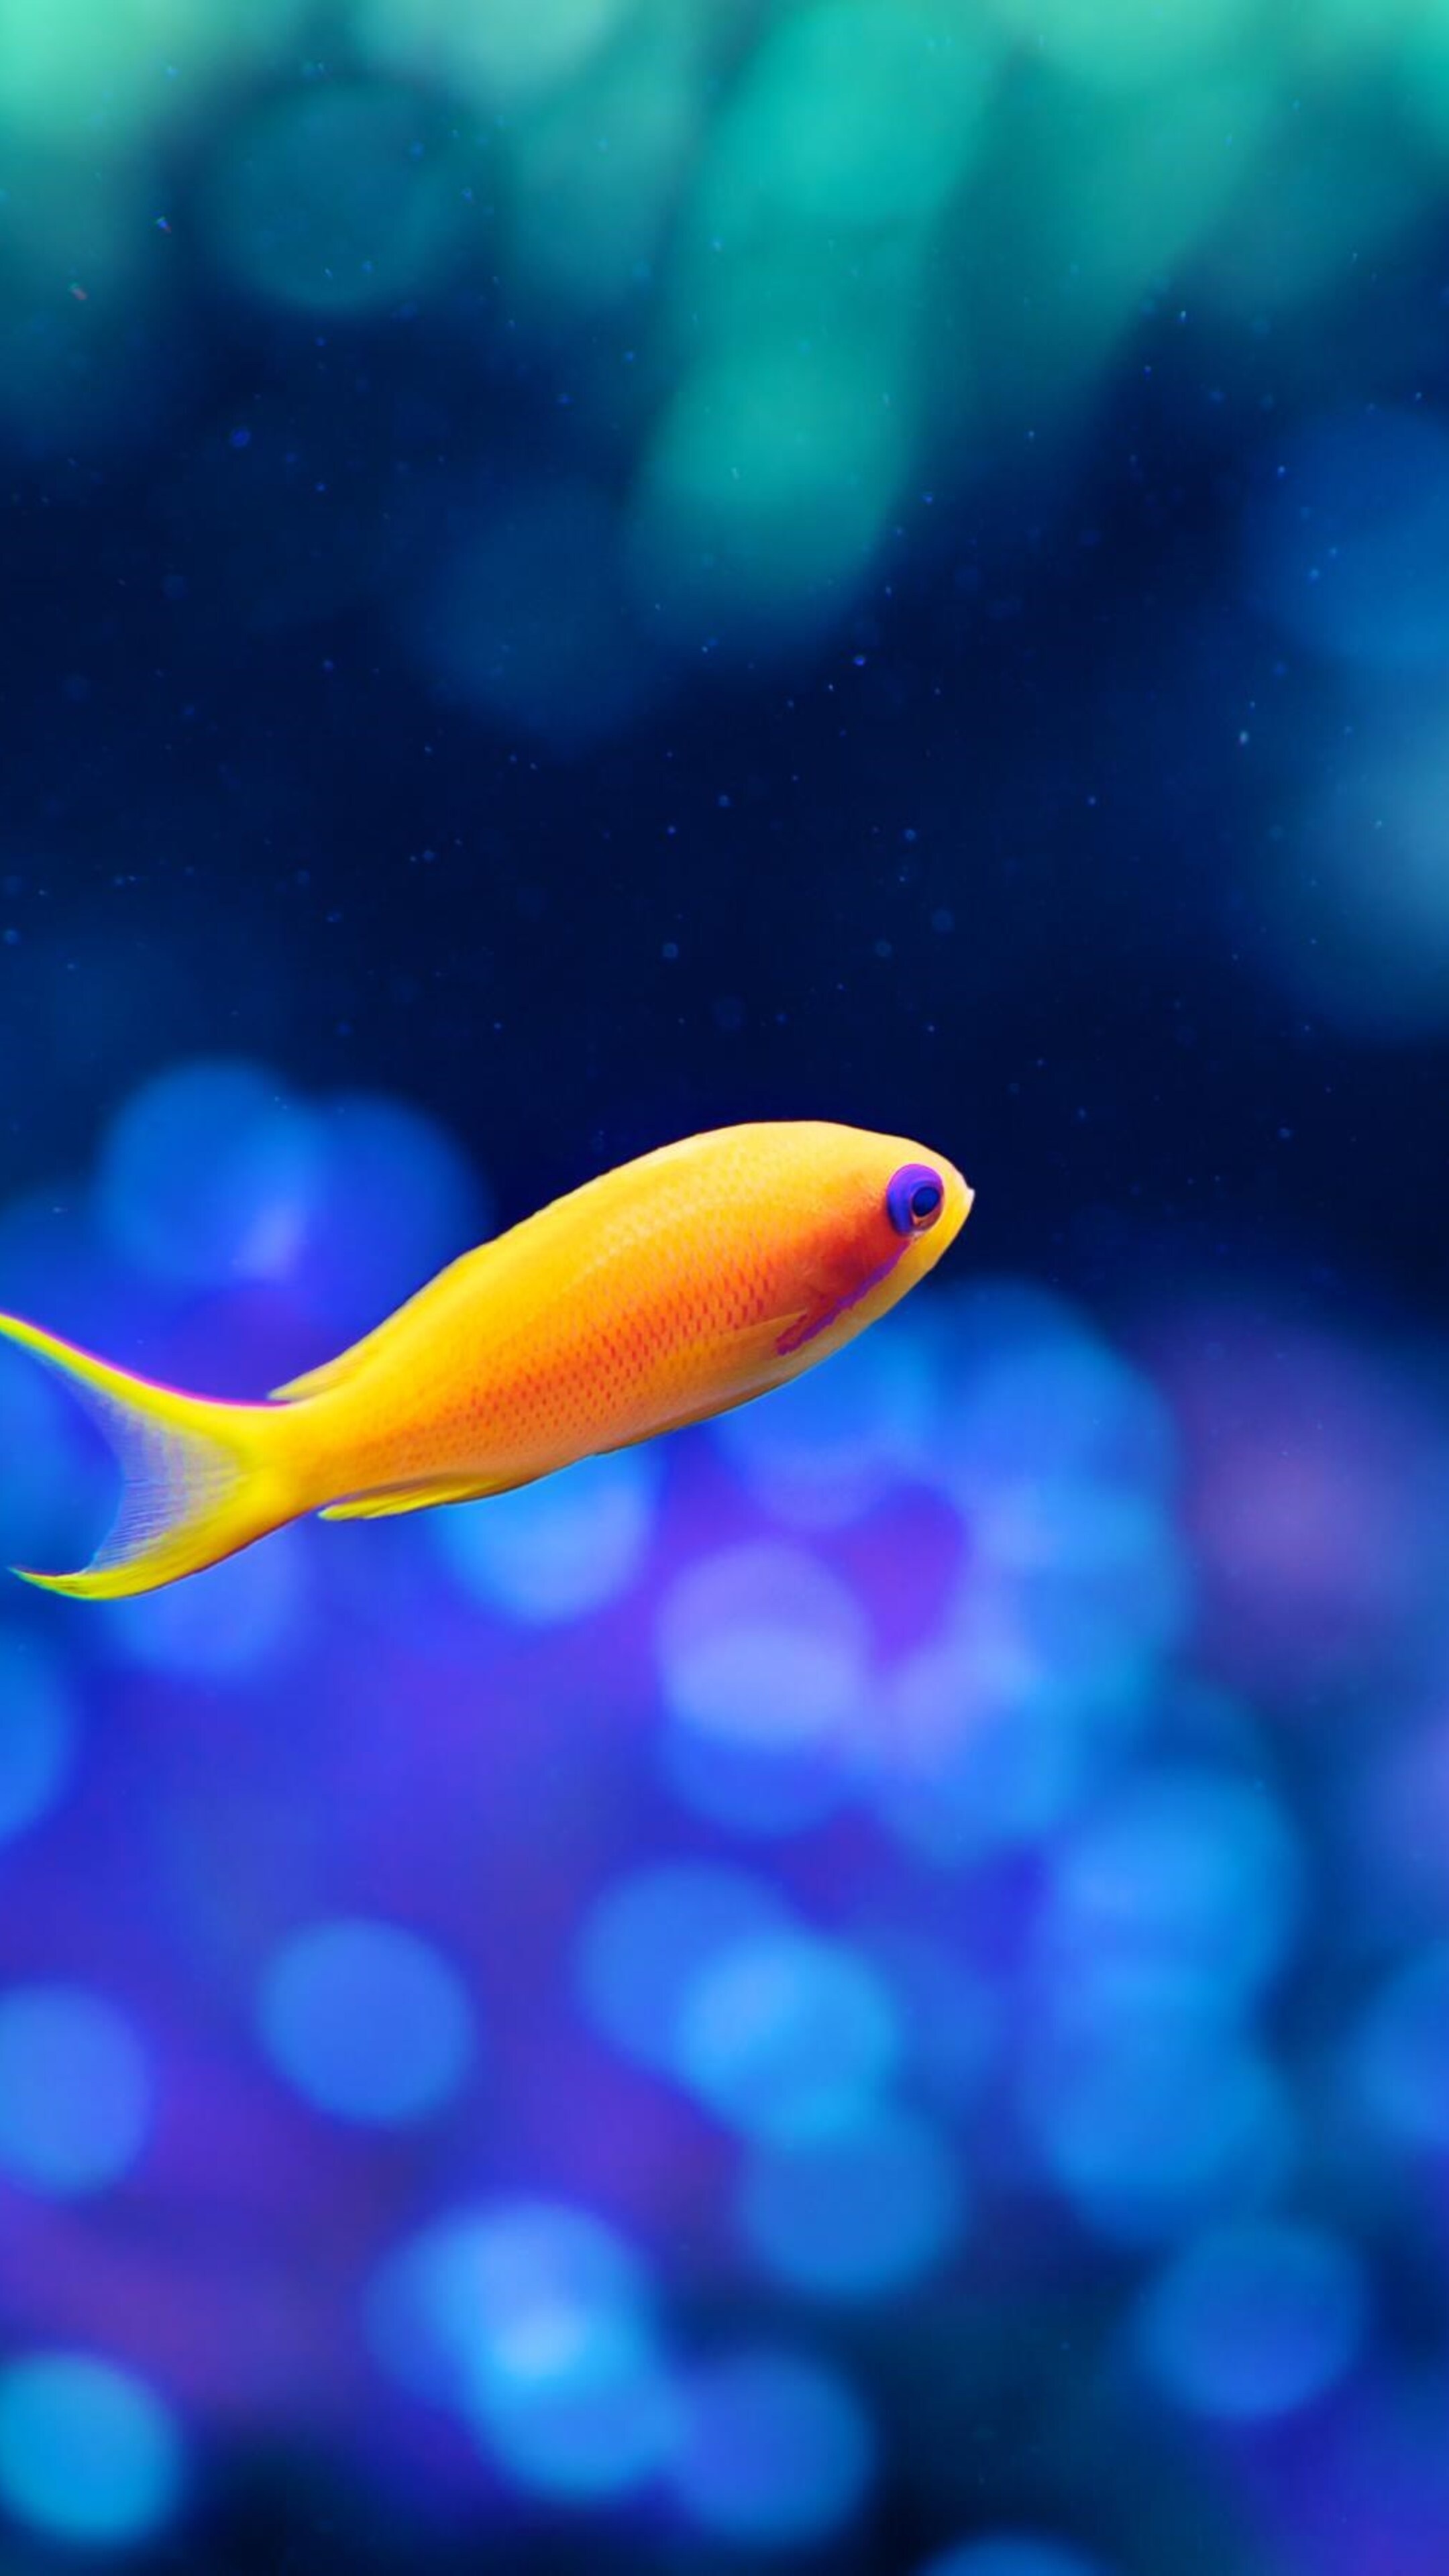 Little fancy fish Sony Xperia wallpapers, Vibrant and vibrant, Colorful aquatic life, Stunning underwater photography, 2160x3840 4K Handy